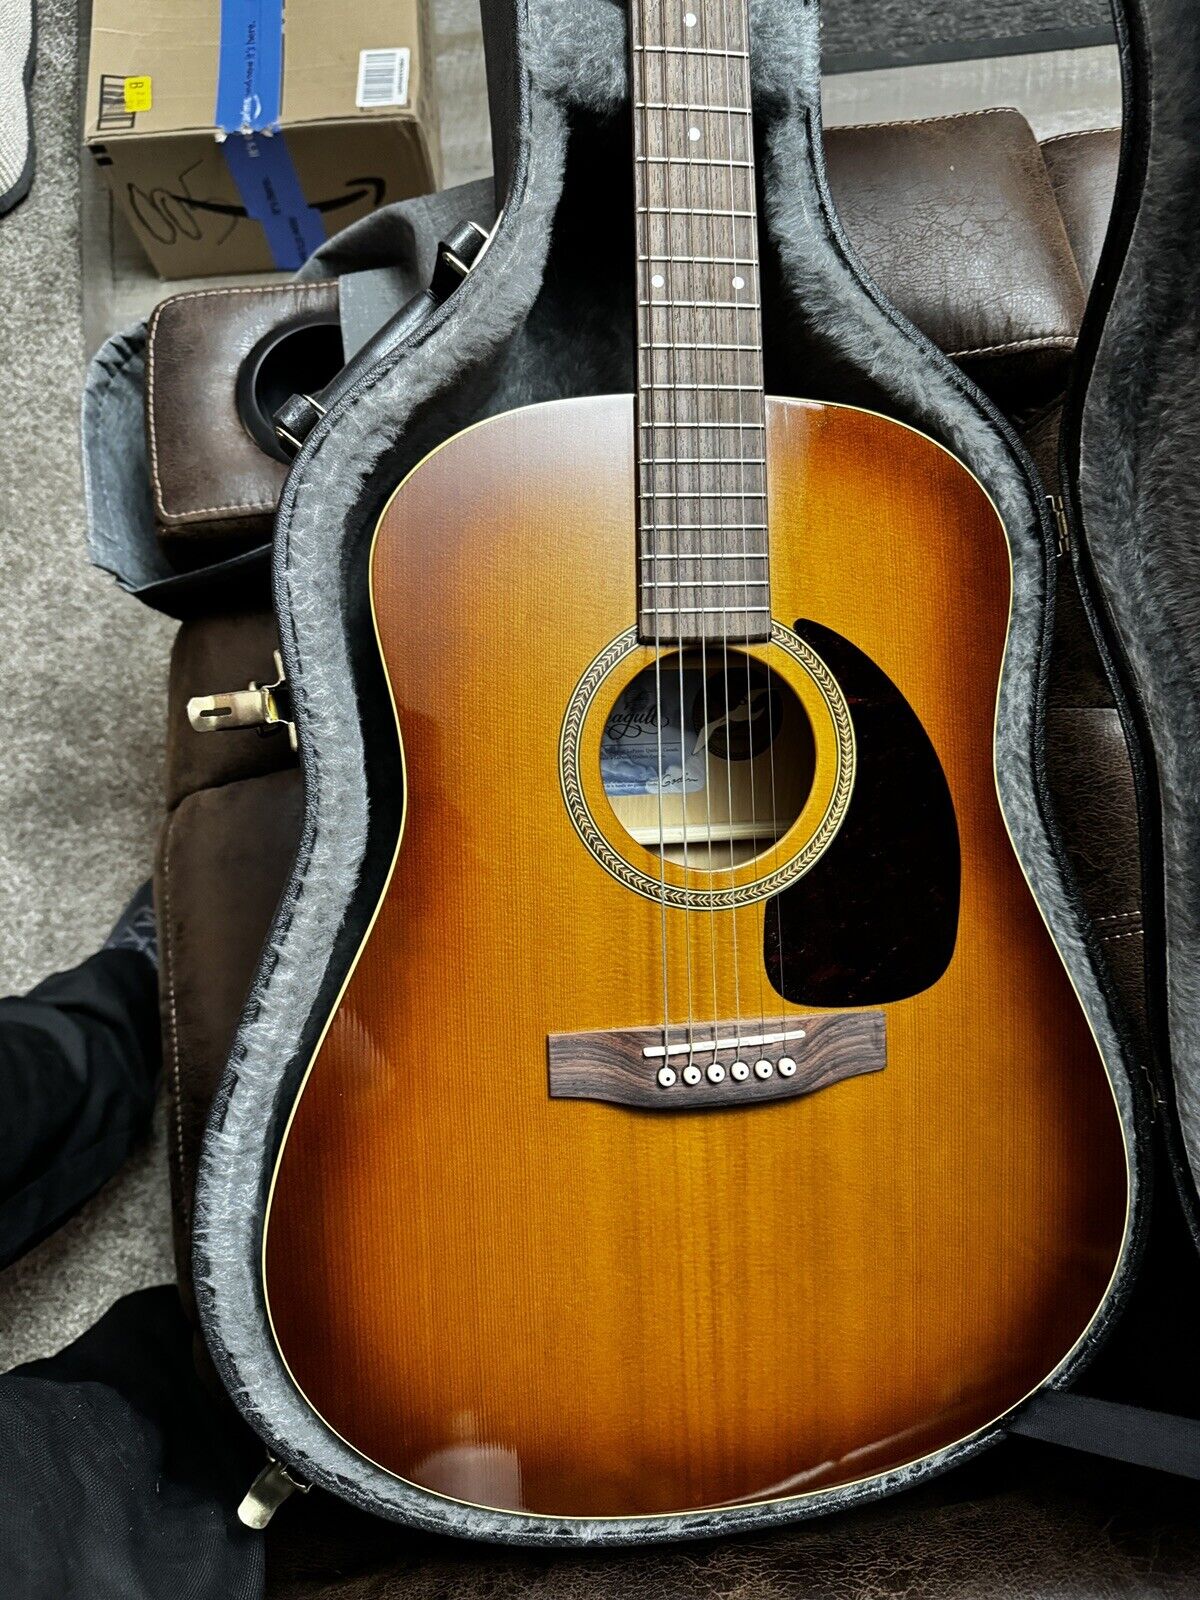 Seagull S6 Tobacco-Burst Acoustic Guitar With Hard Case And Ower Book 6